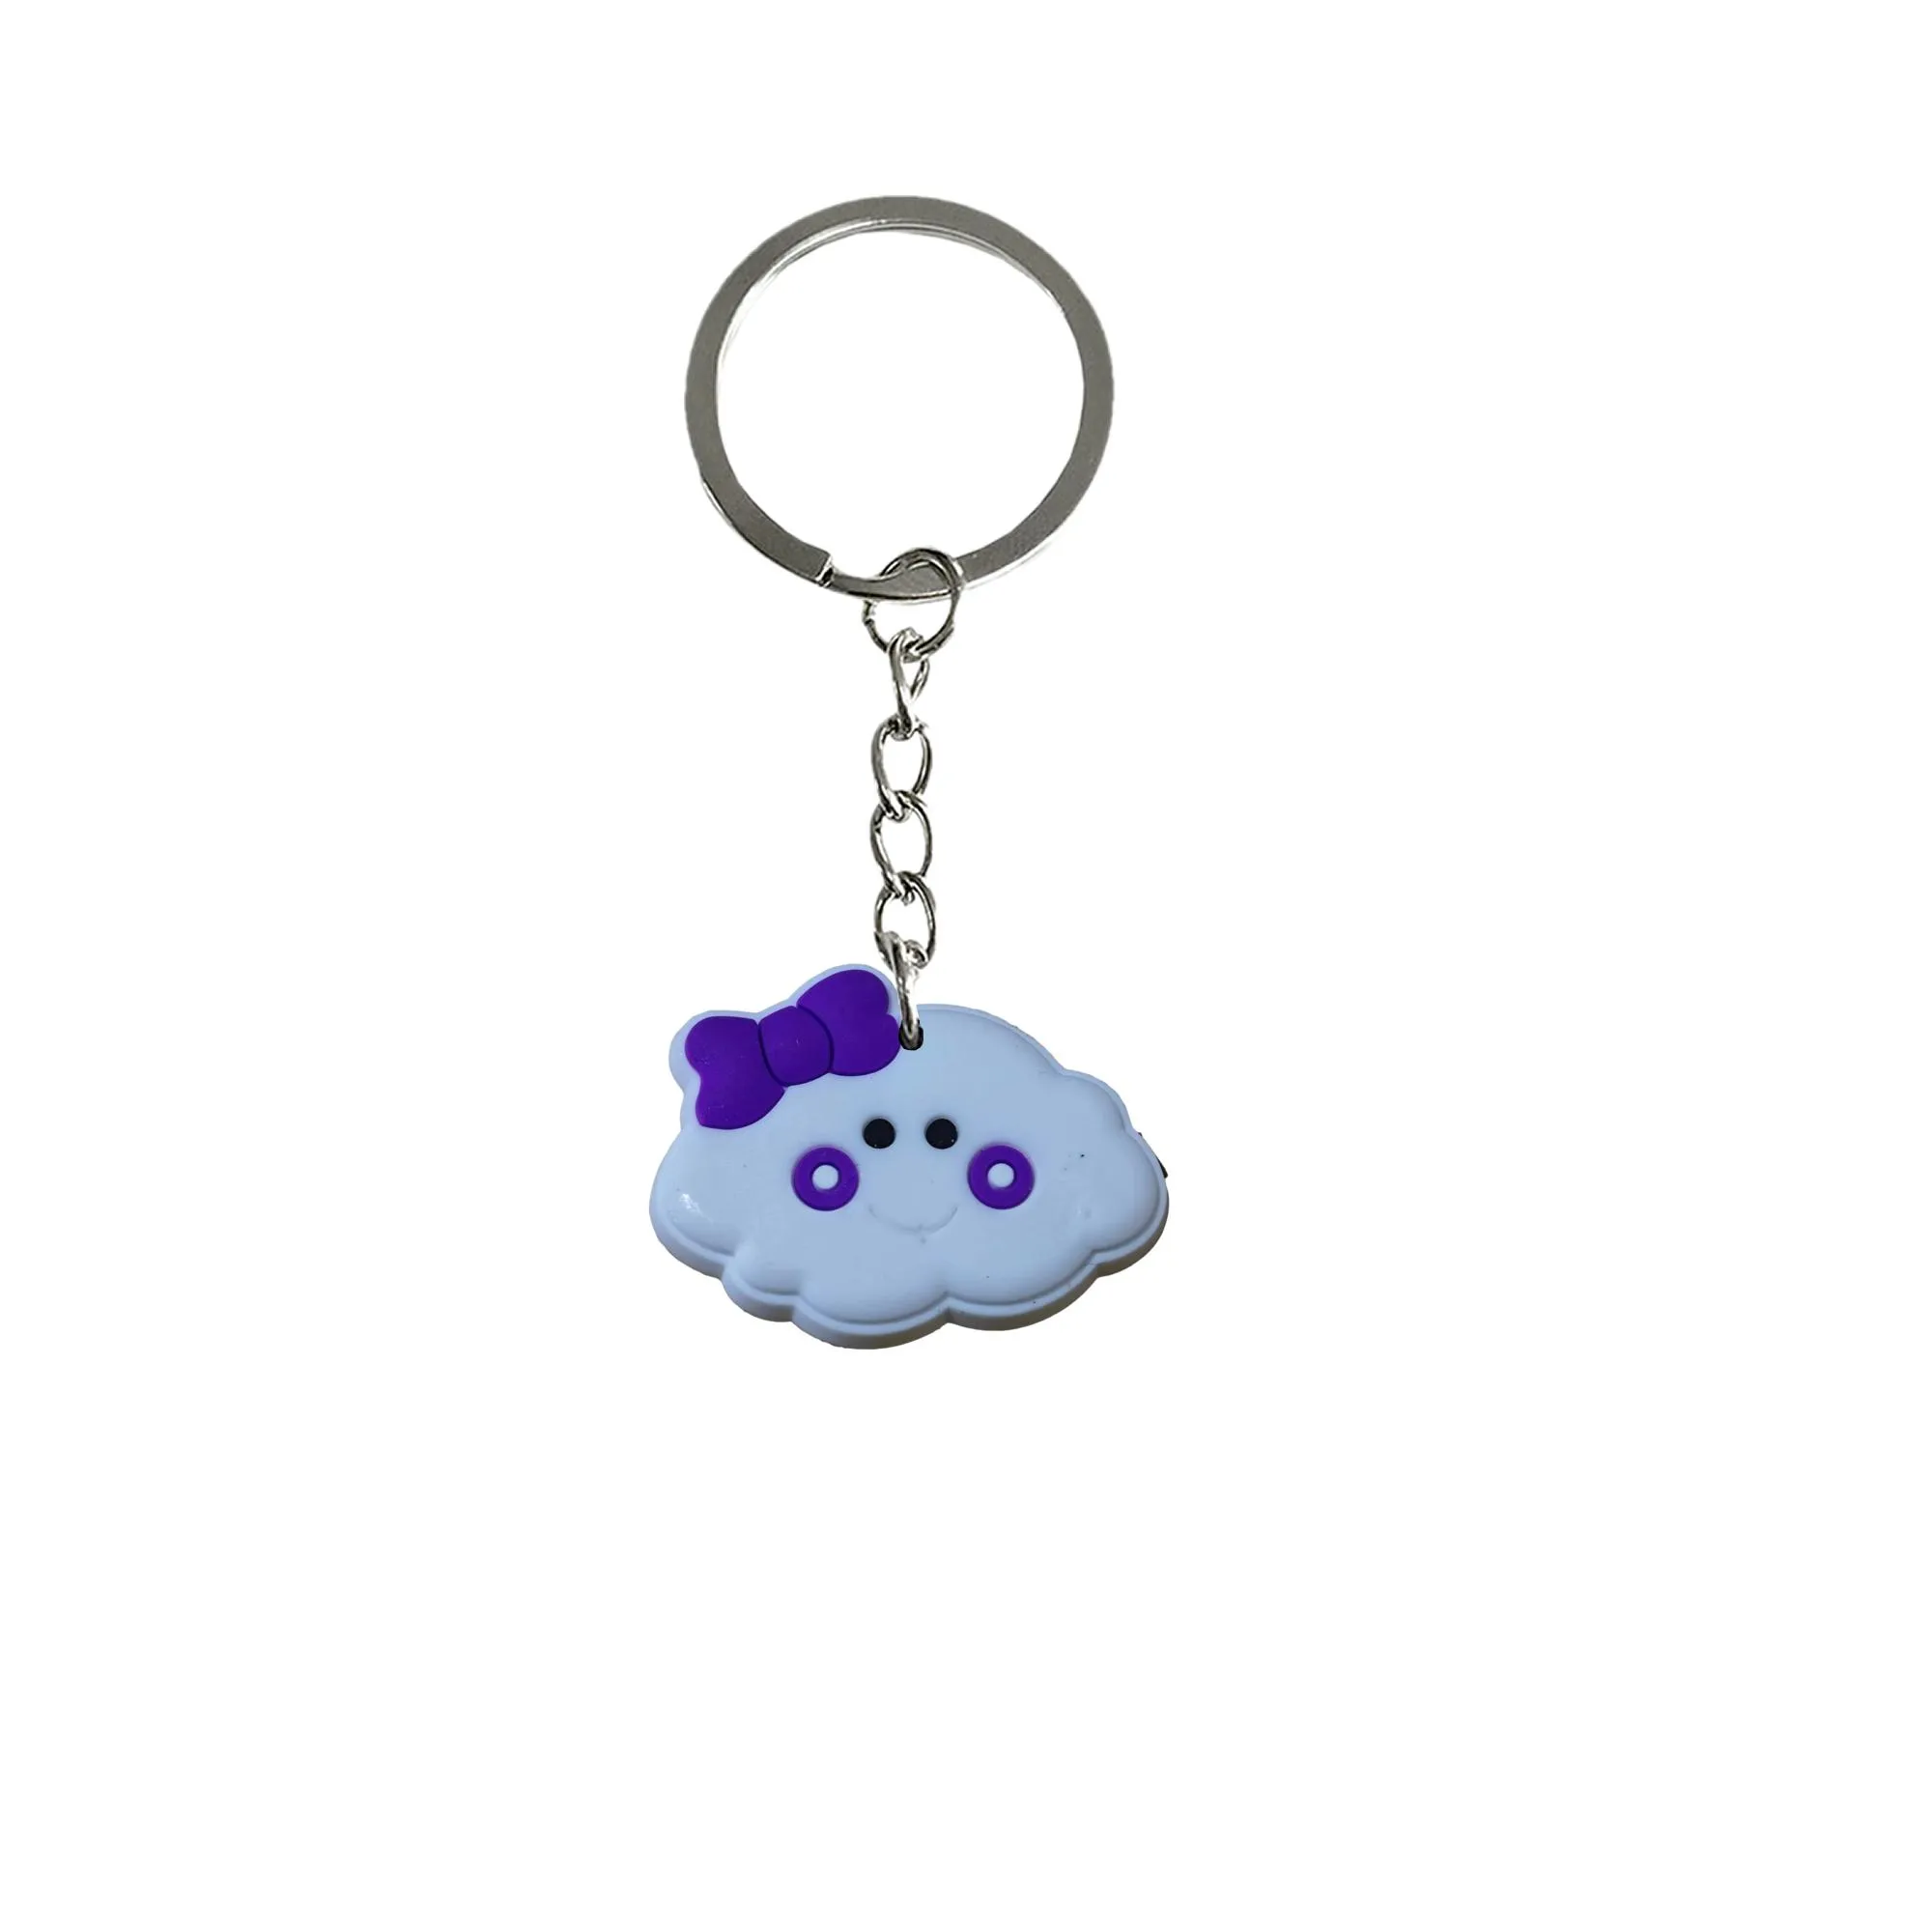 cloud two keychain keychains for childrens party favors classroom prizes anime cool backpacks keyring suitable schoolbag key chain accessories backpack handbag and car gift valentines day colorful character with wristlet